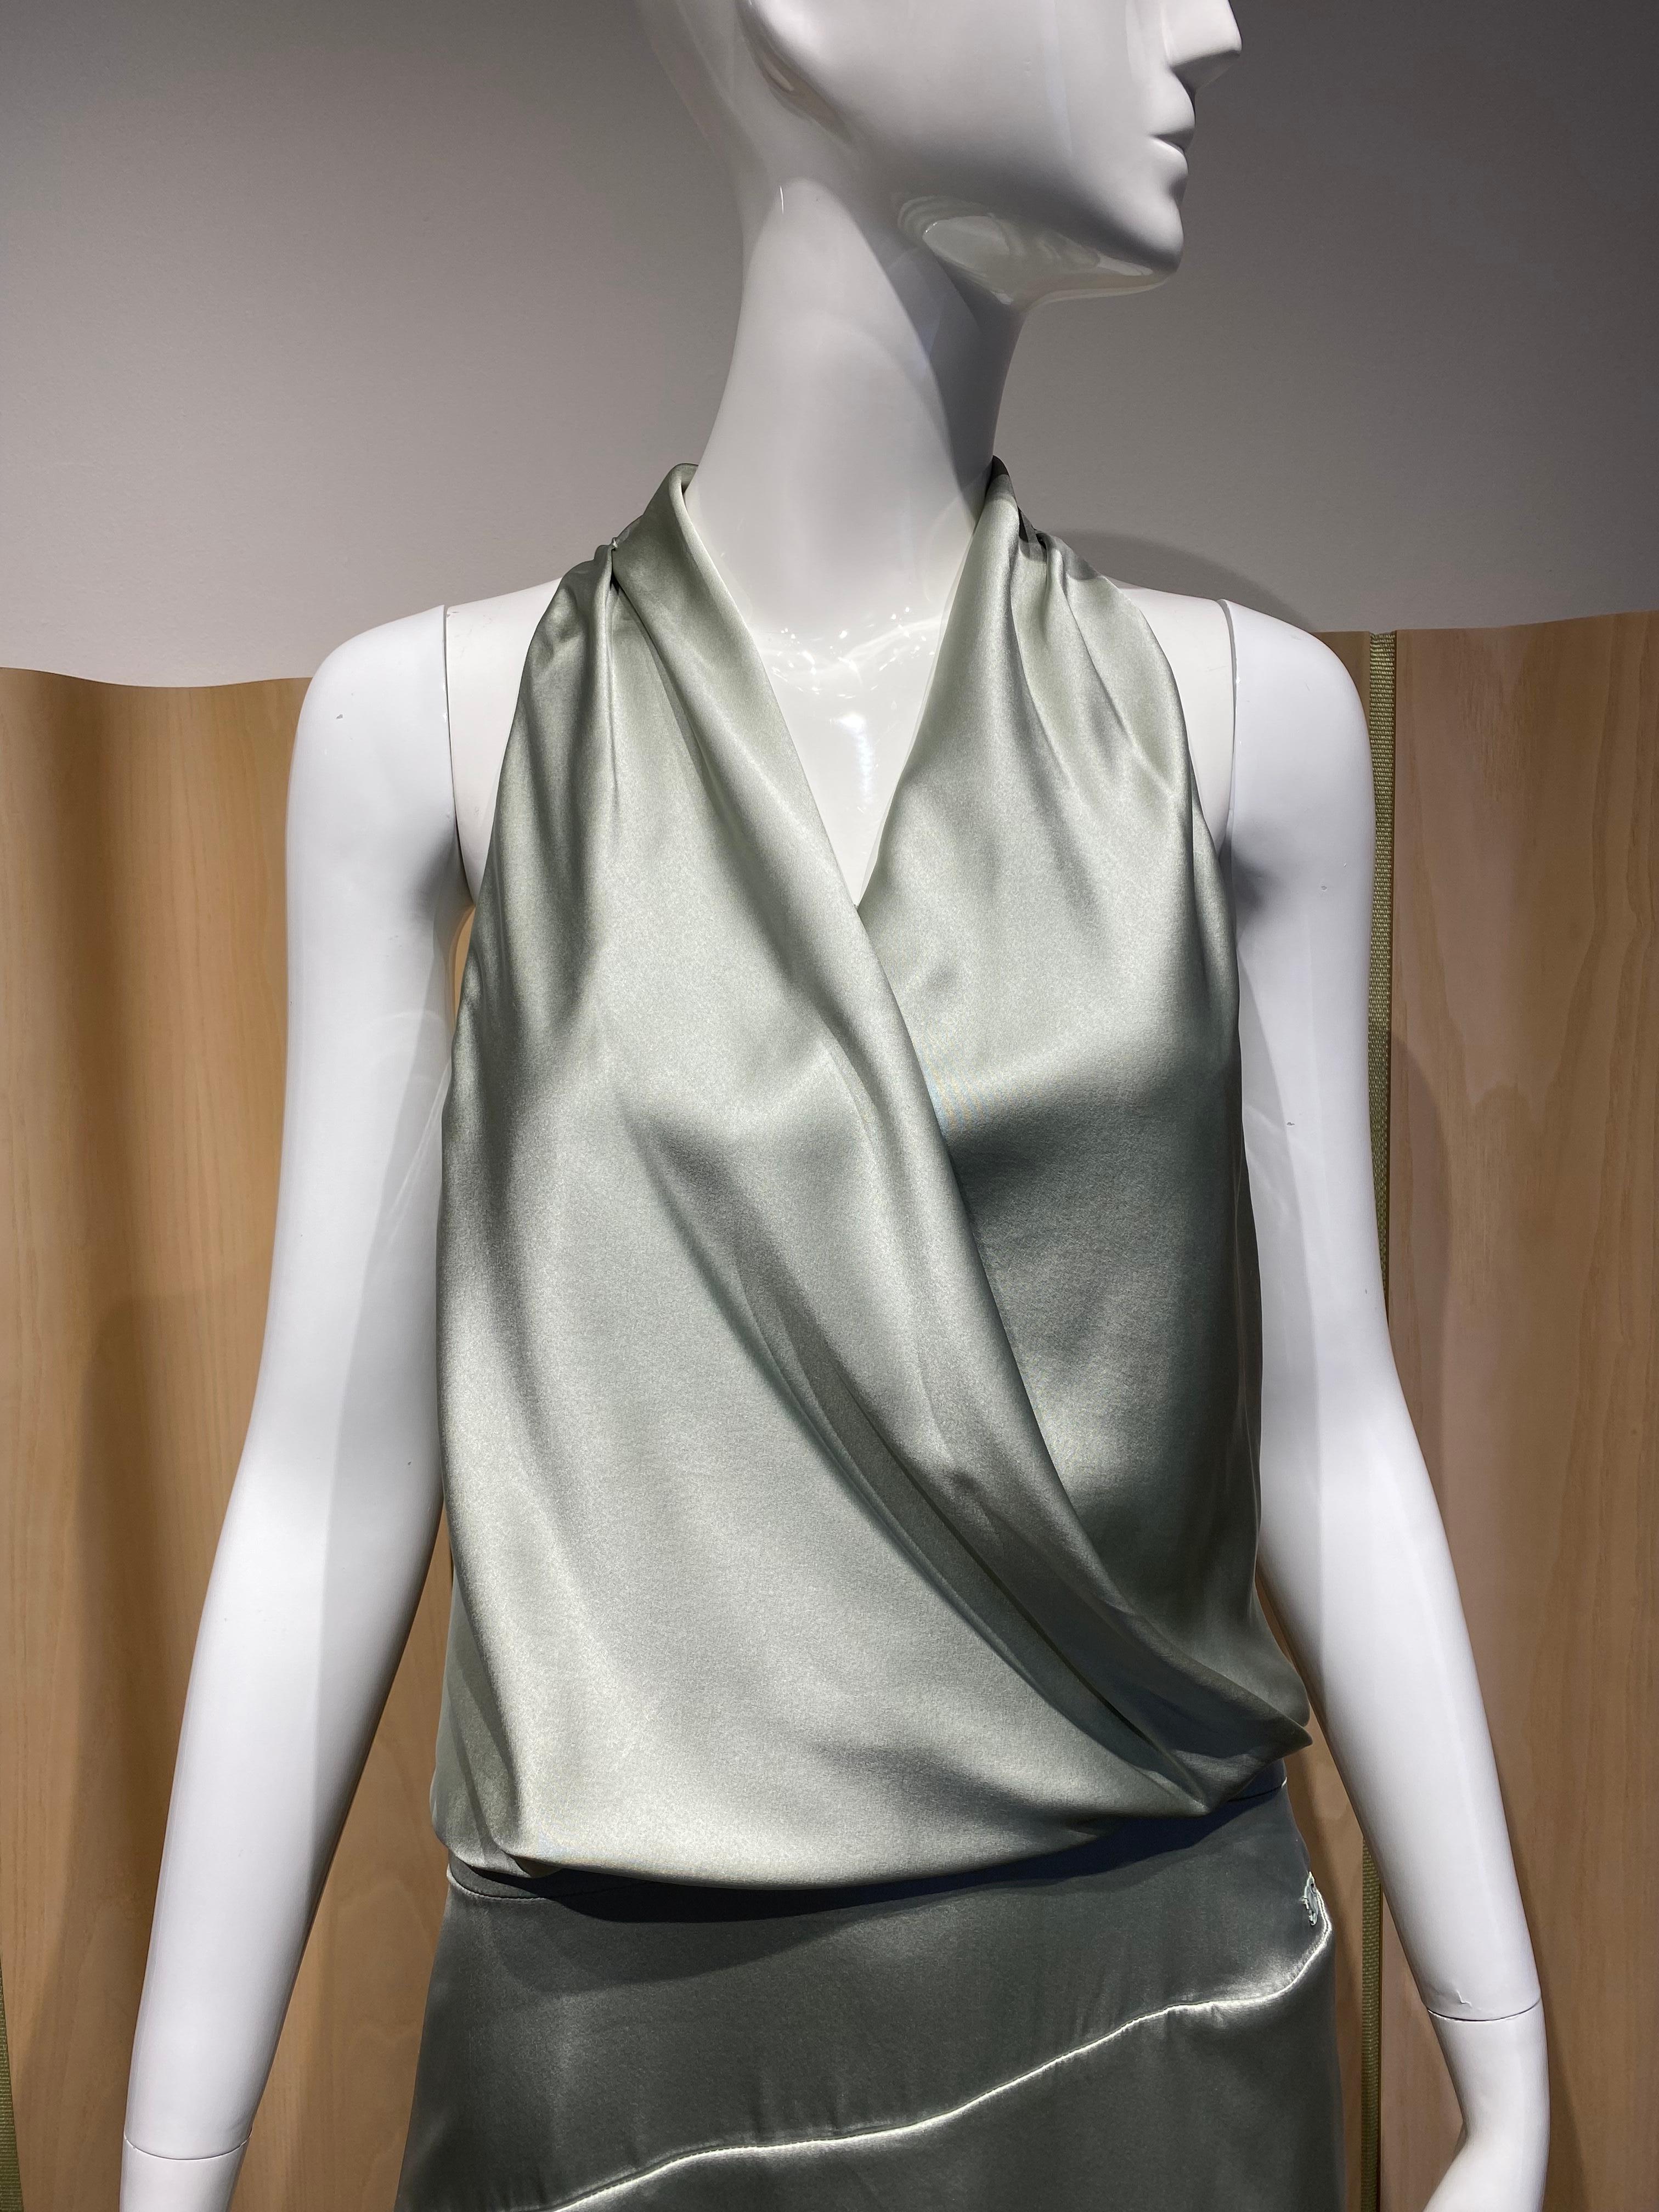 Chanel silk Green halter dress.

Chanel Green Silk Charmeuse Halter Gown. Perfect for wedding or rehearsal dinner gown.
Bust 36” / Waist 30” / Hip 36”. Dress length 61.5”
Fit size 2/4/6